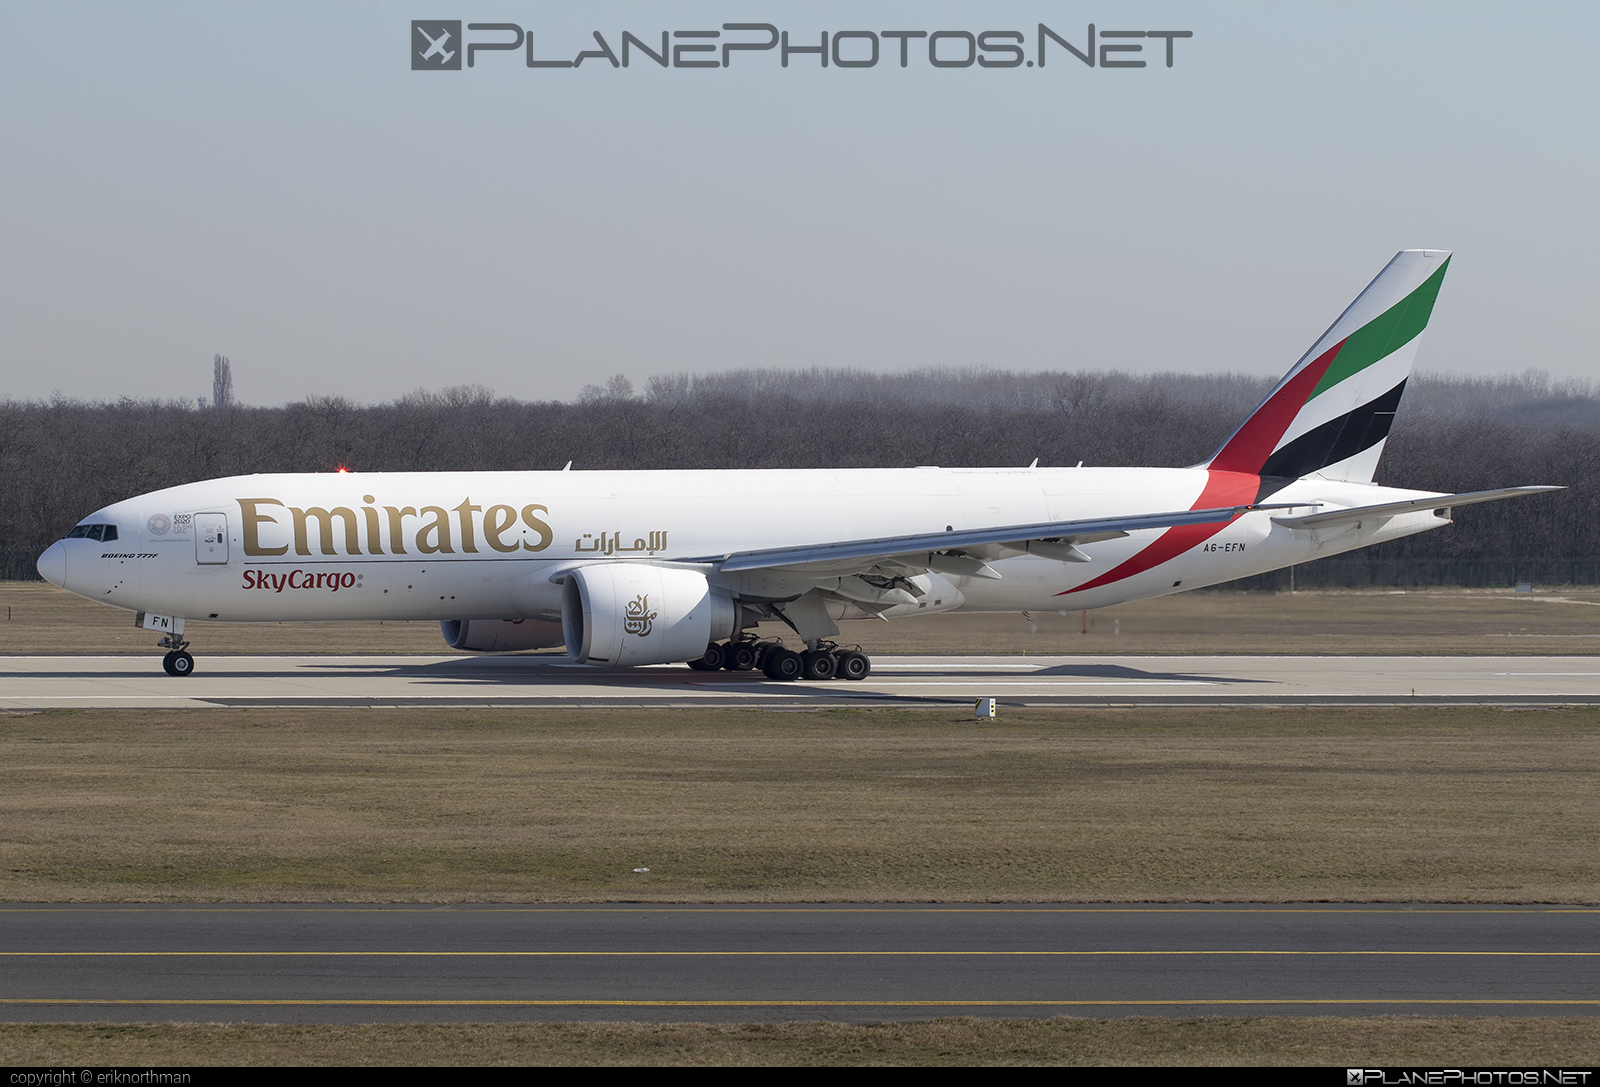 Boeing 777F - A6-EFN operated by Emirates SkyCargo #b777 #b777f #b777freighter #boeing #boeing777 #tripleseven